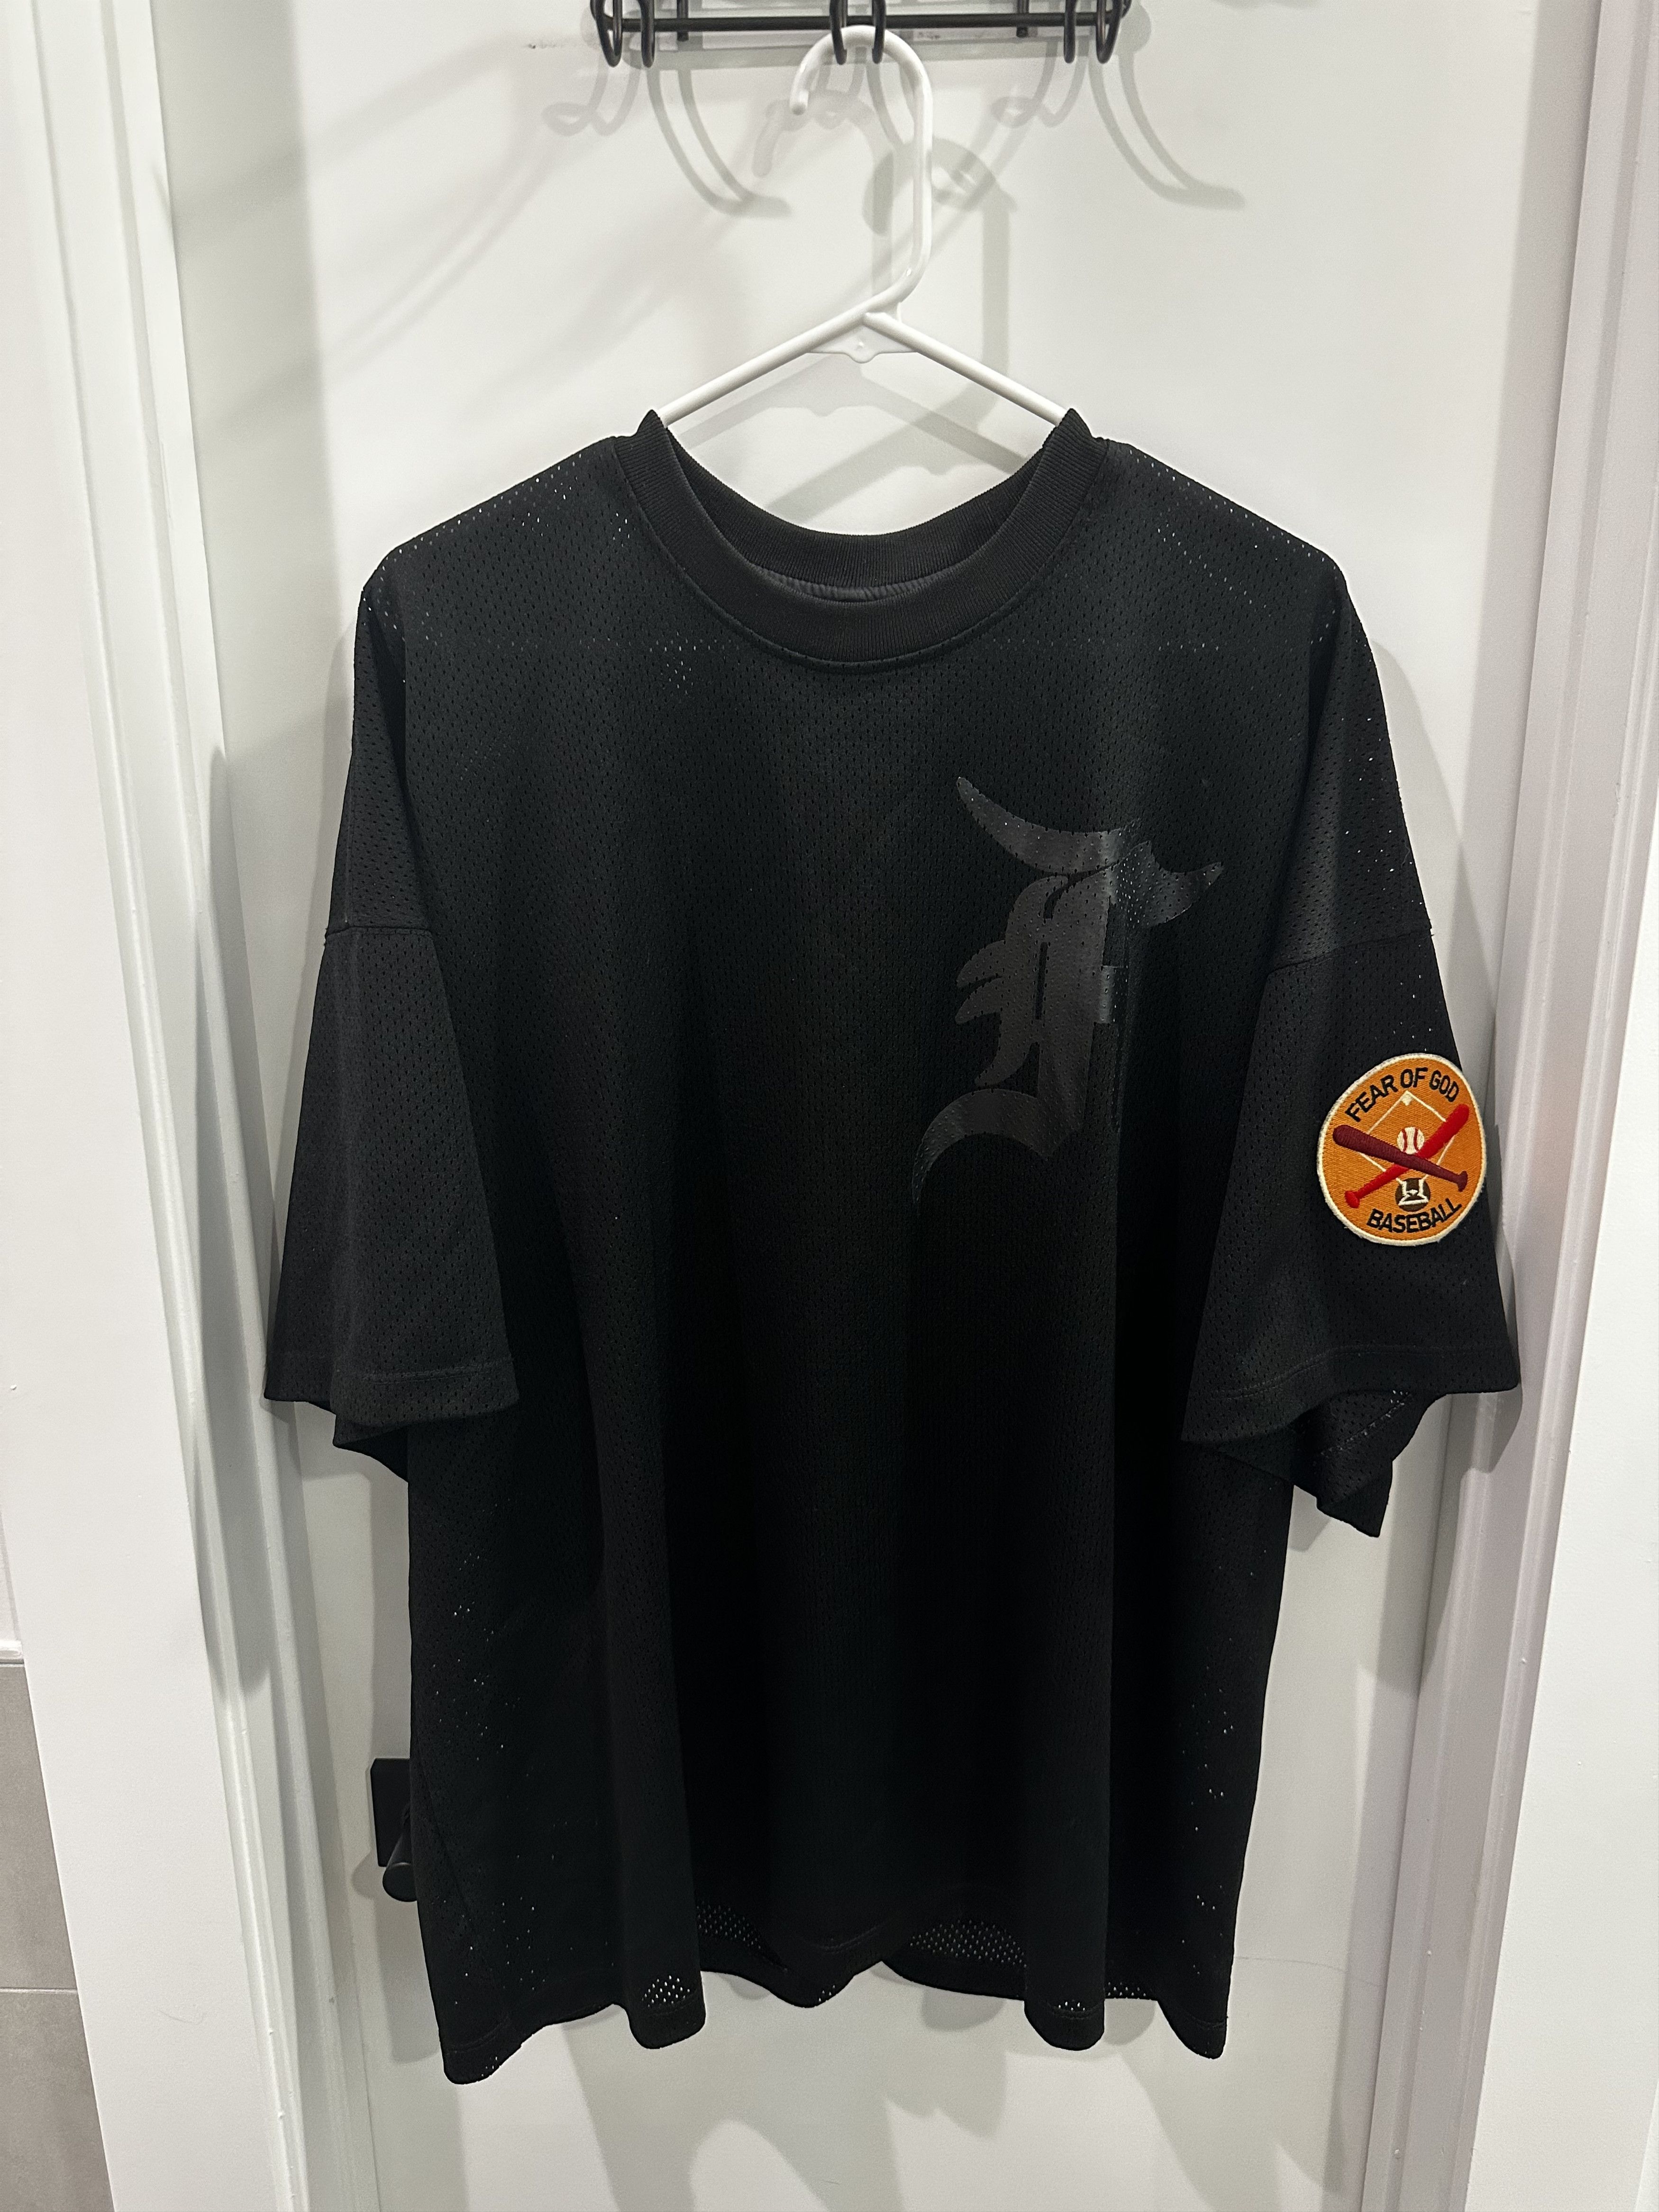 Fear of God Mesh Batting Practice Jersey (Black Friday Exclusive 